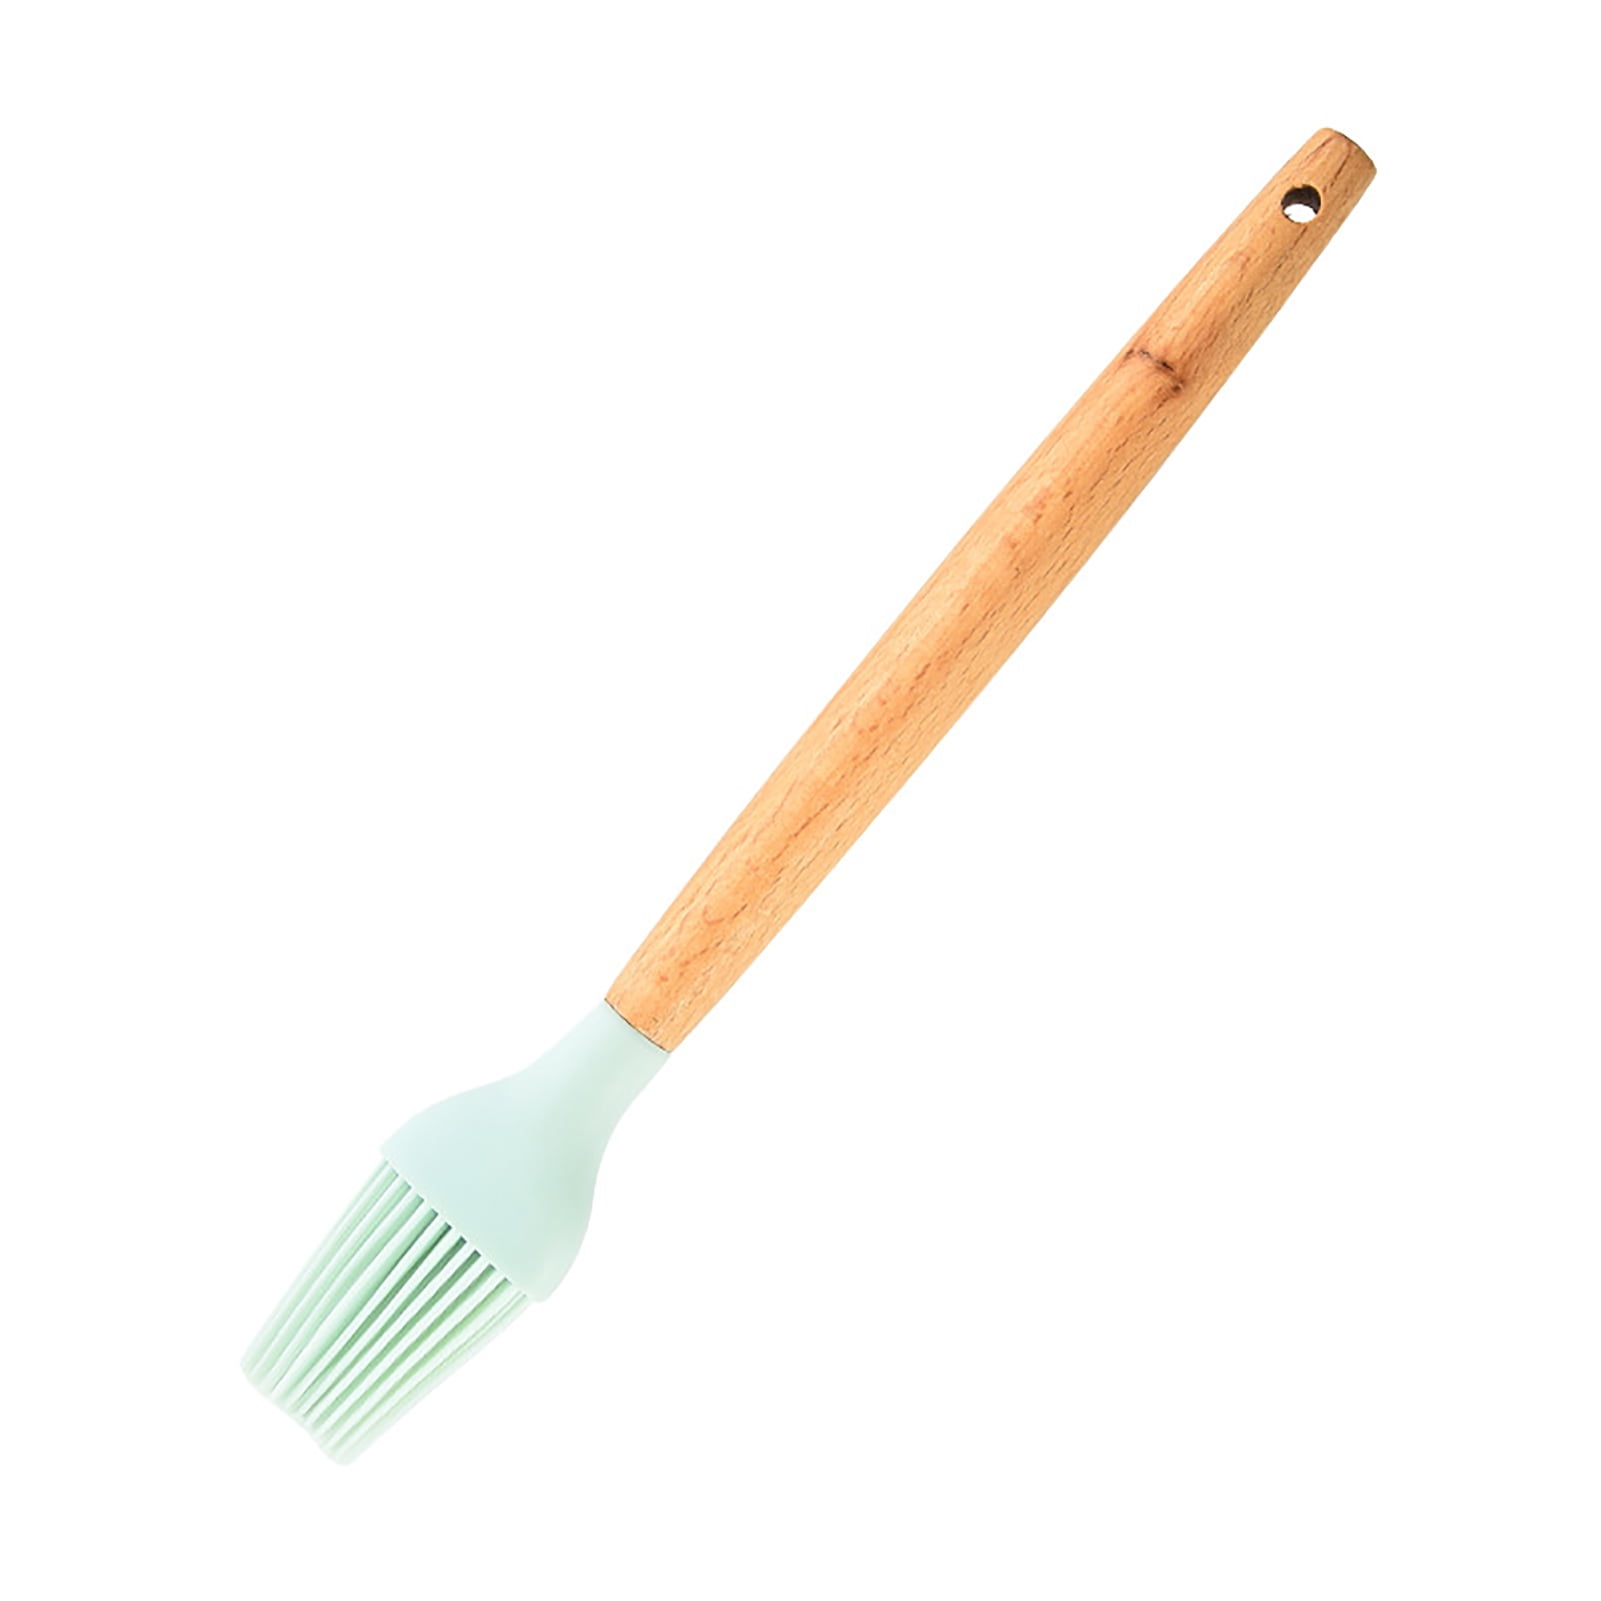 Alexsix 1/2 Pcs Silicone Basting Pastry Brush Heat-Resistant Oil Butter Sauce Spread Brushes Baking & Pastry Utensils, Size: Nordic Green